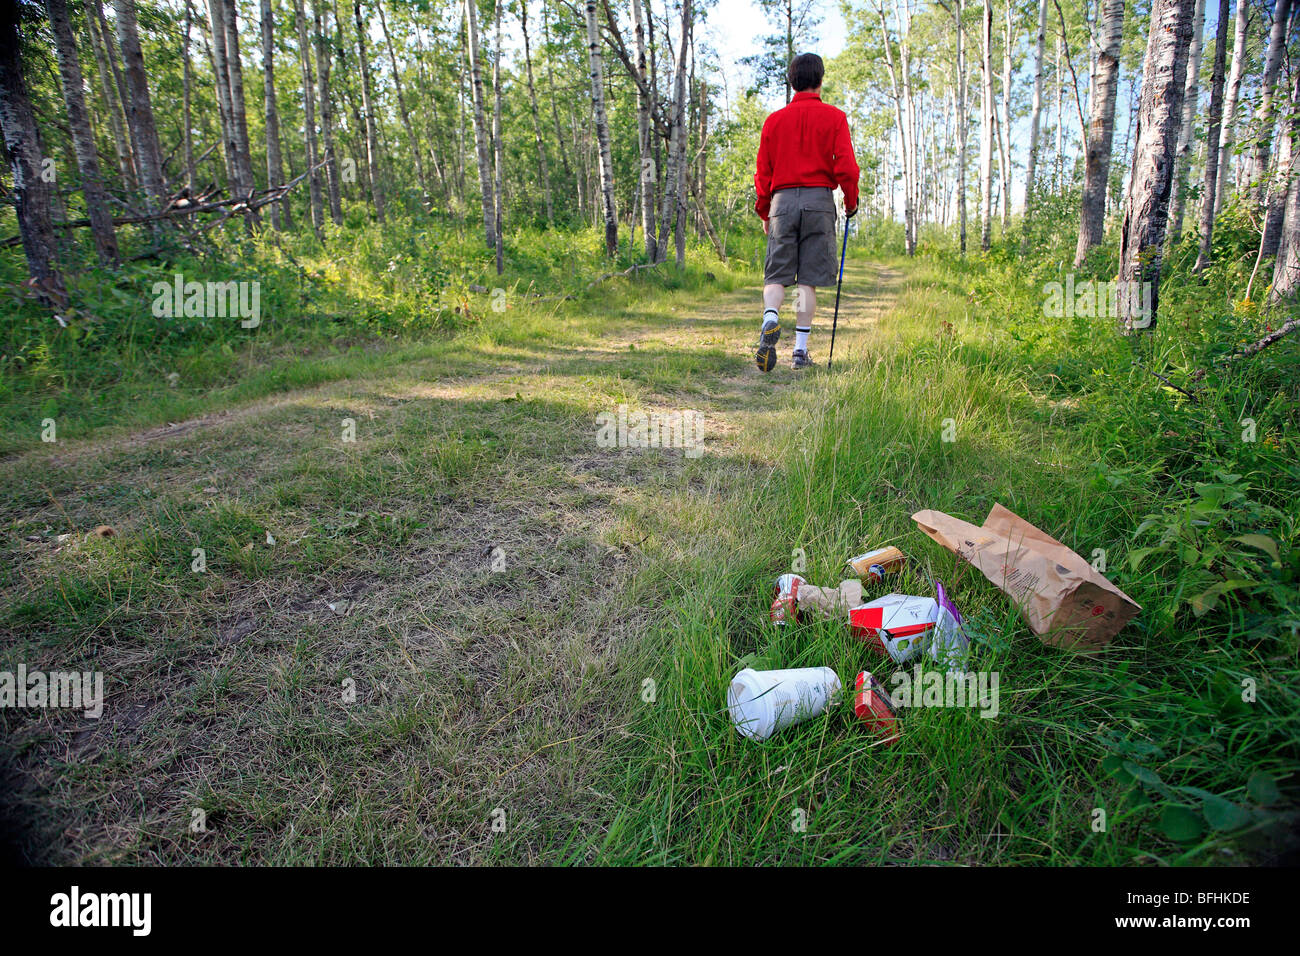 Middle age male hiking on forest trail with garbage on the ground. Stock Photo